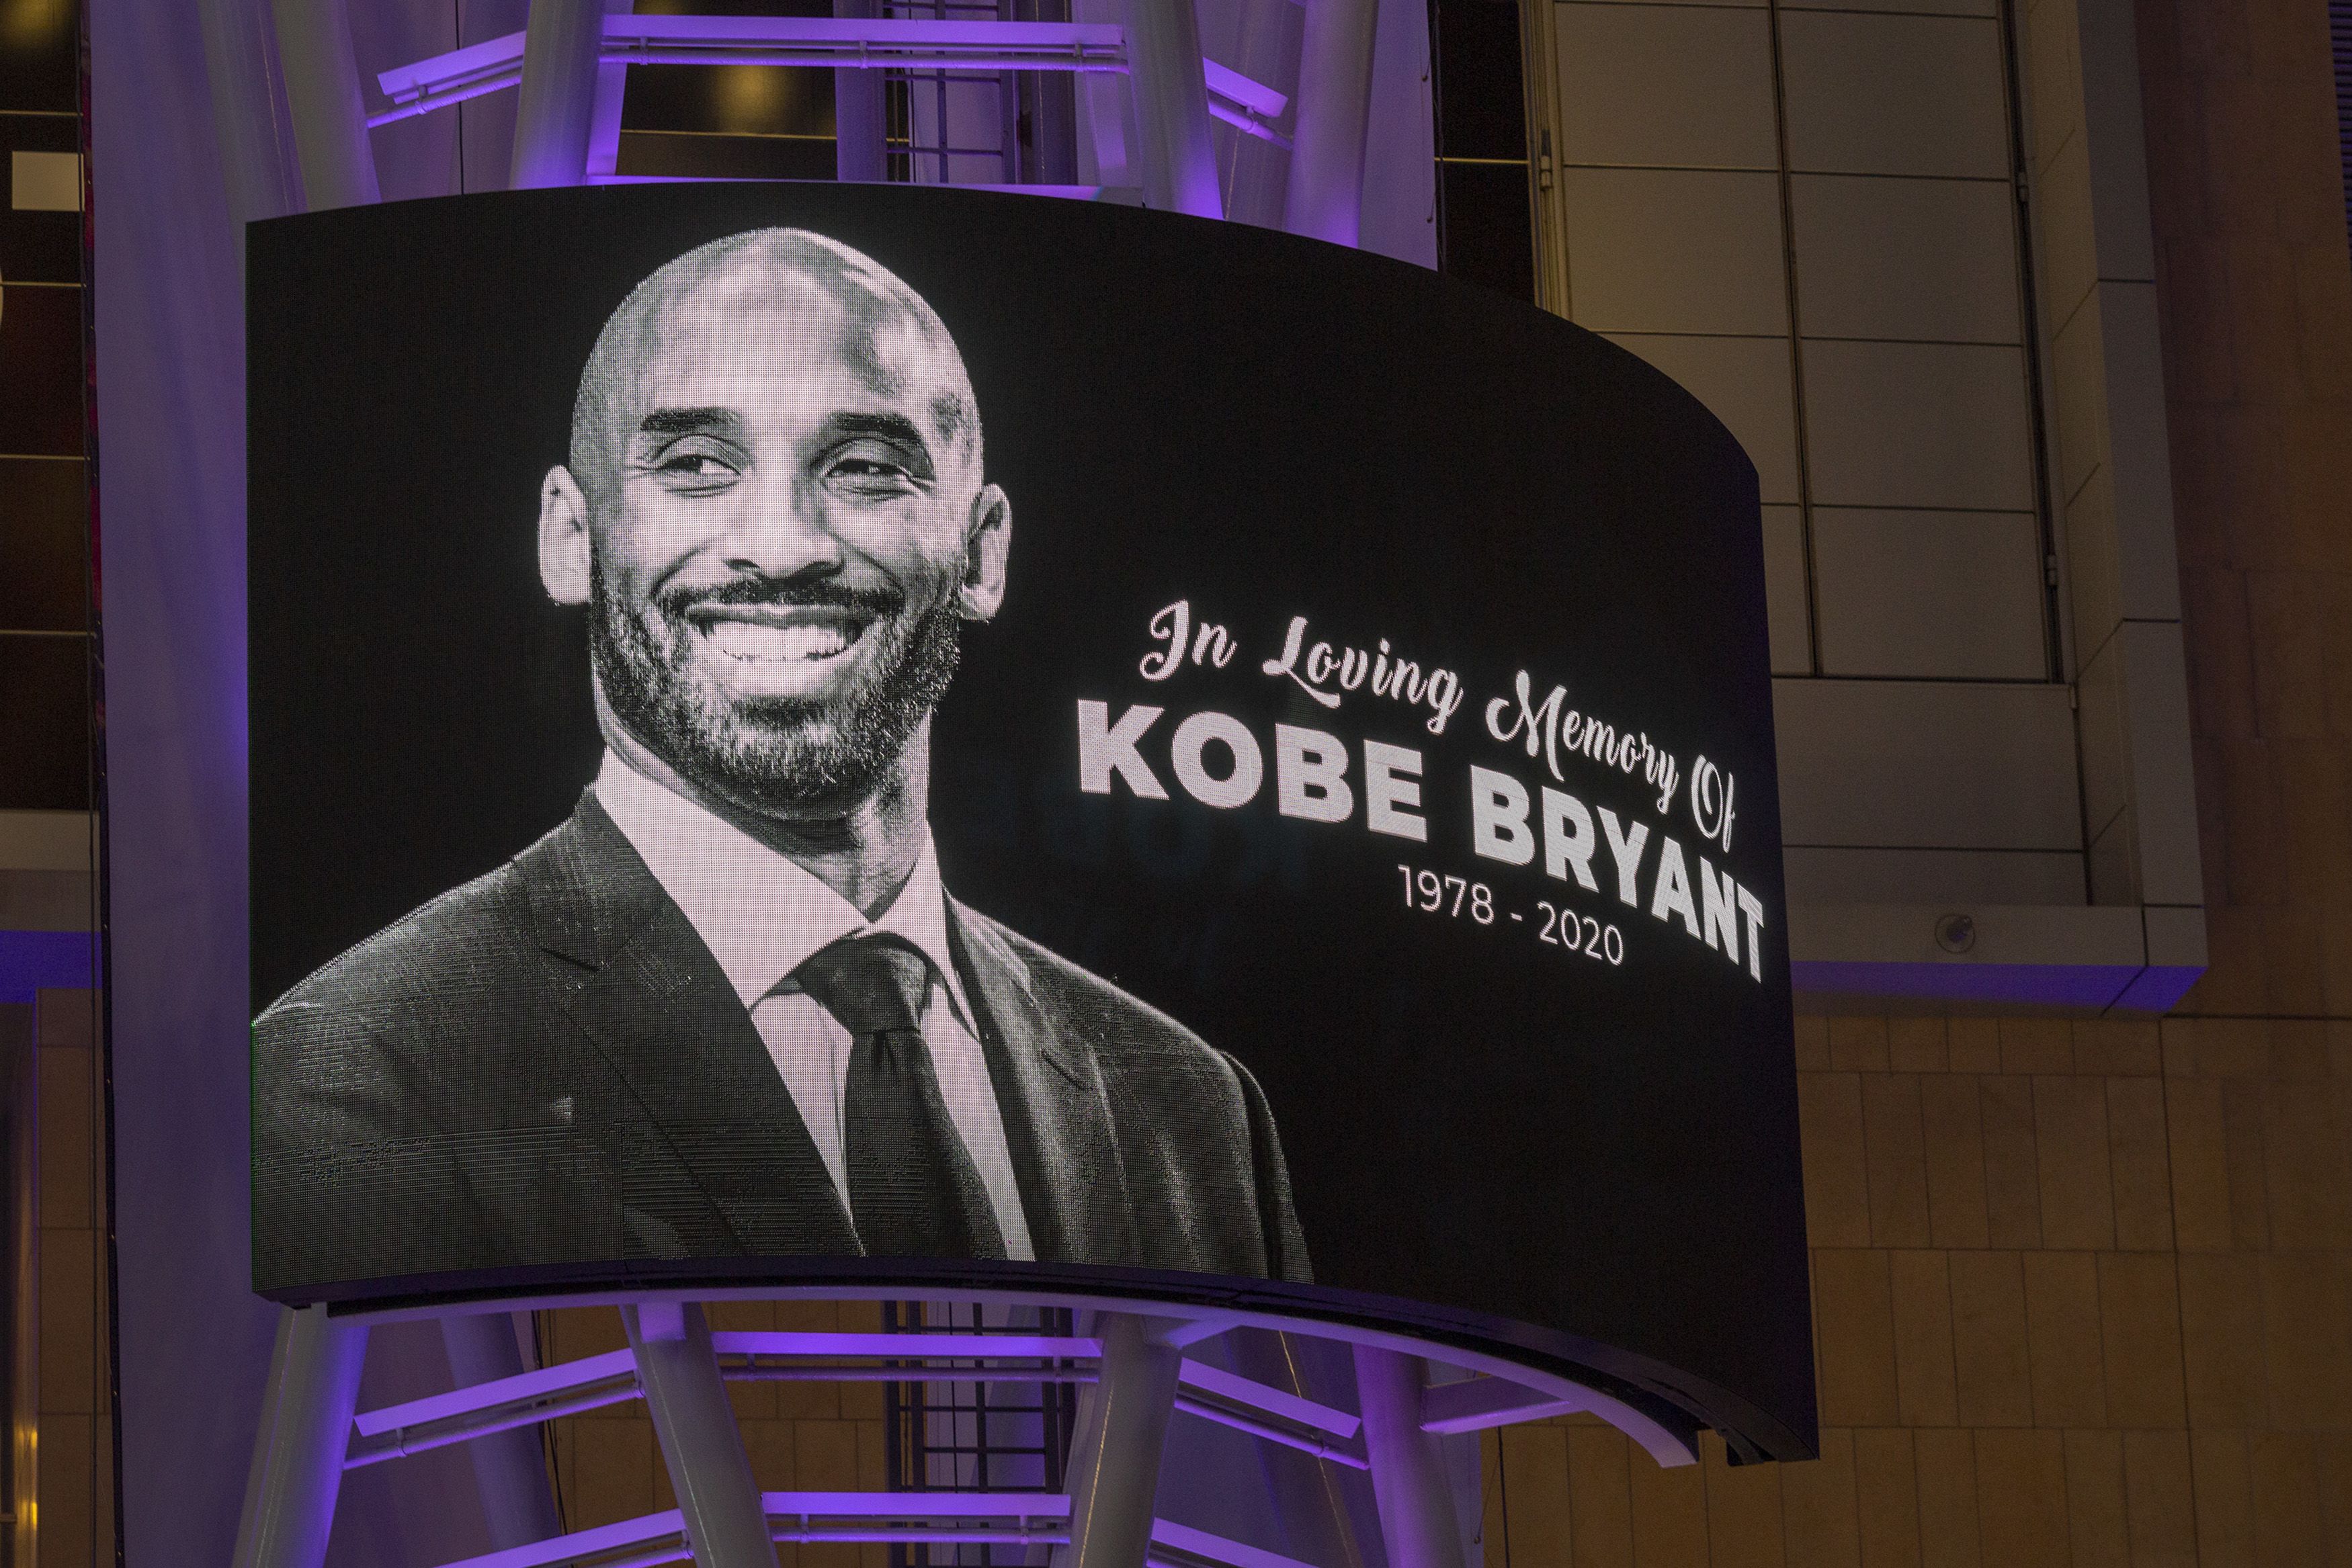 Smithsonian museum honors Kobe Bryant's place in history - Los Angeles Times